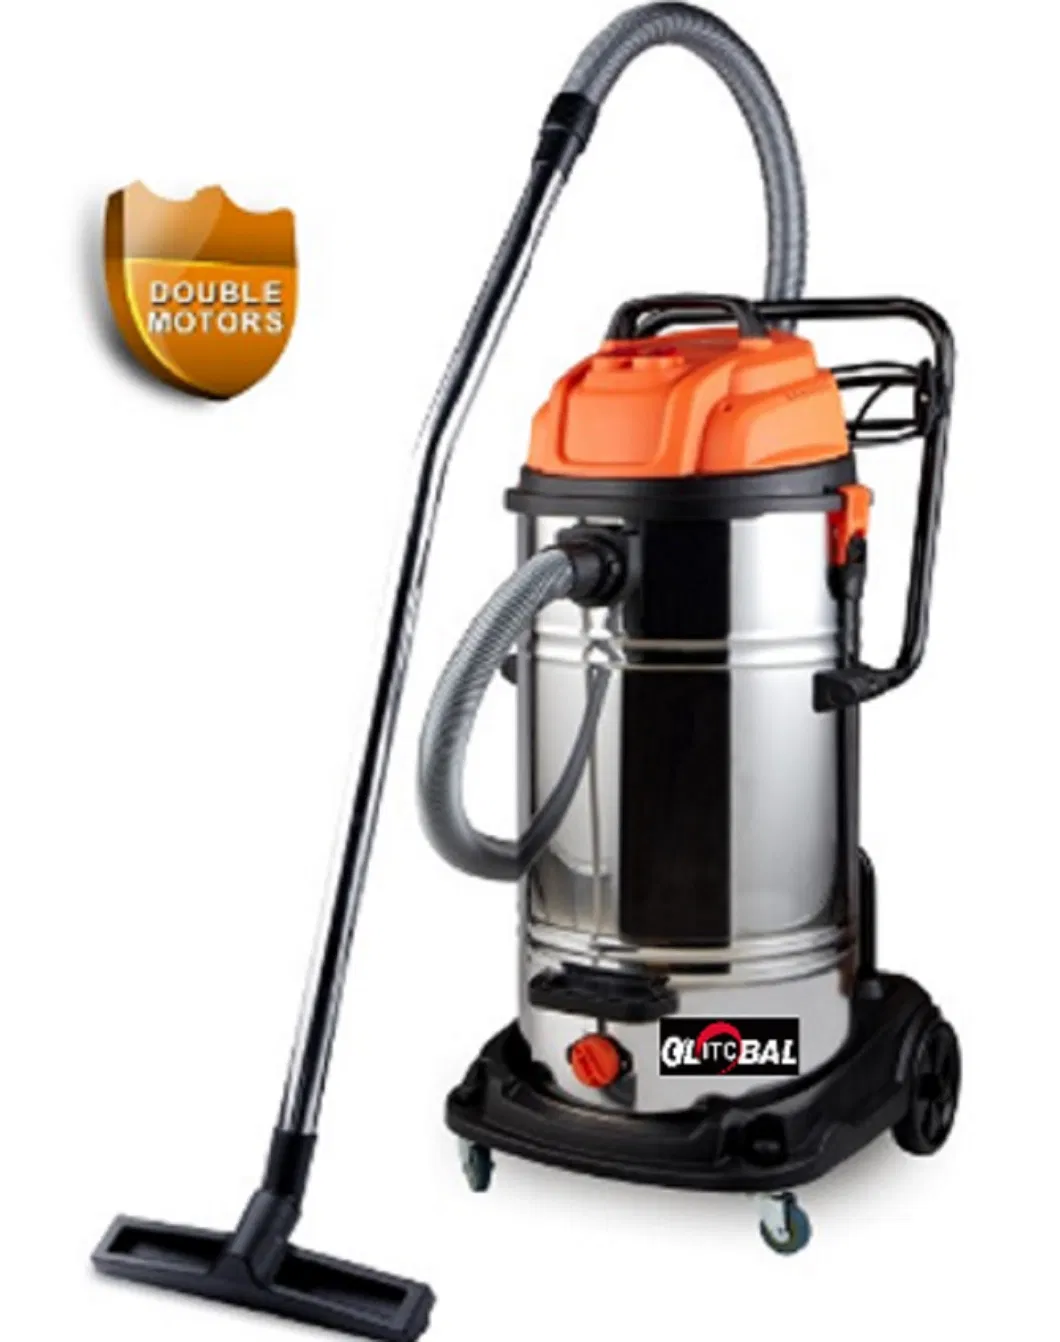 2000W Double Motors-Professional Electric Wet&Dry Vacuum Cleaner Machine-Power Tools